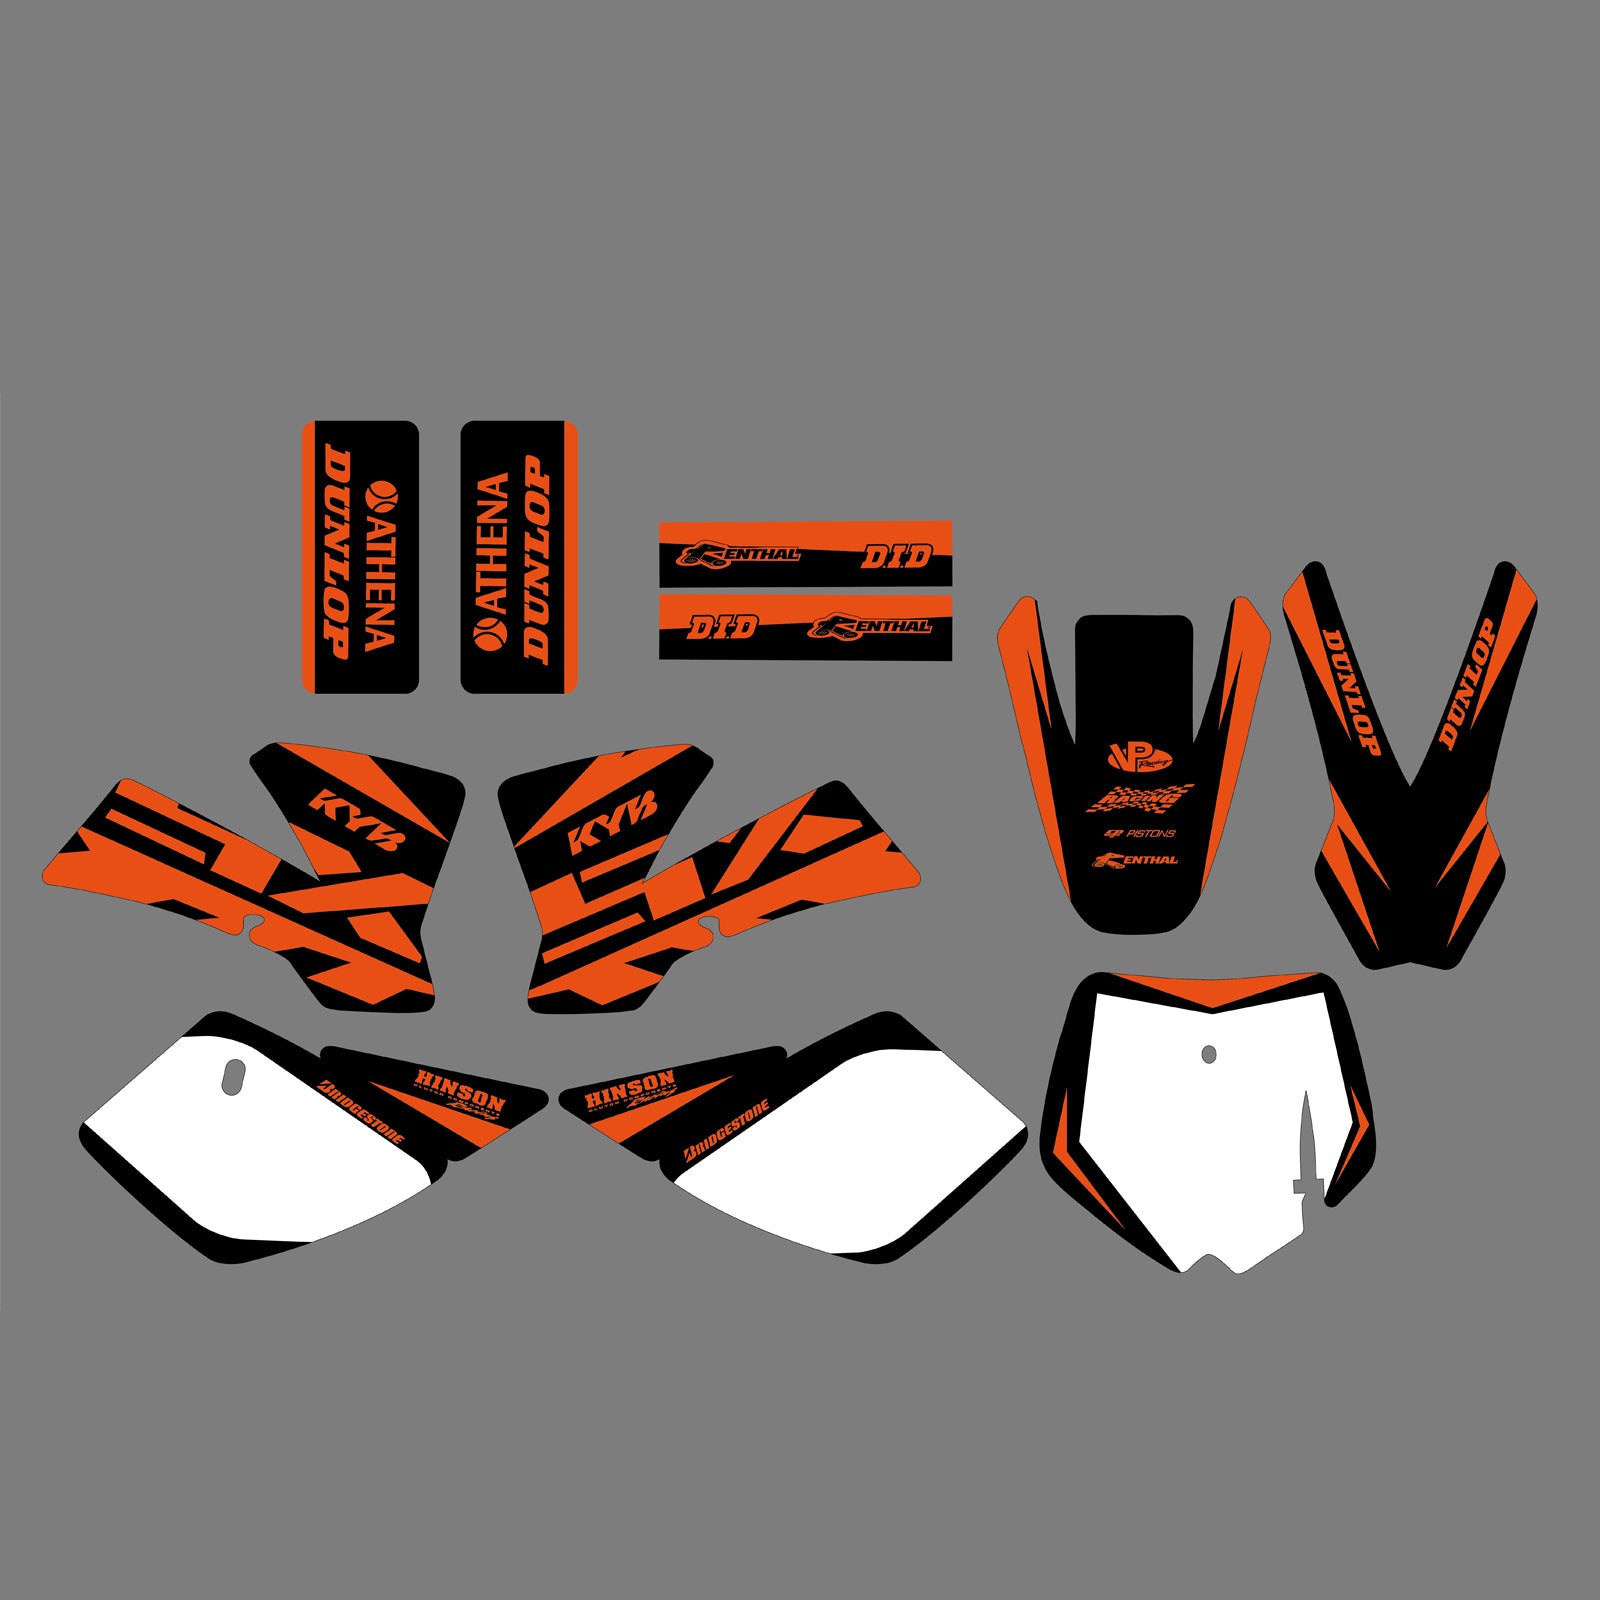 Team Graphics Backgrounds Decals Stickers For KTM 50 SX 2002-2008